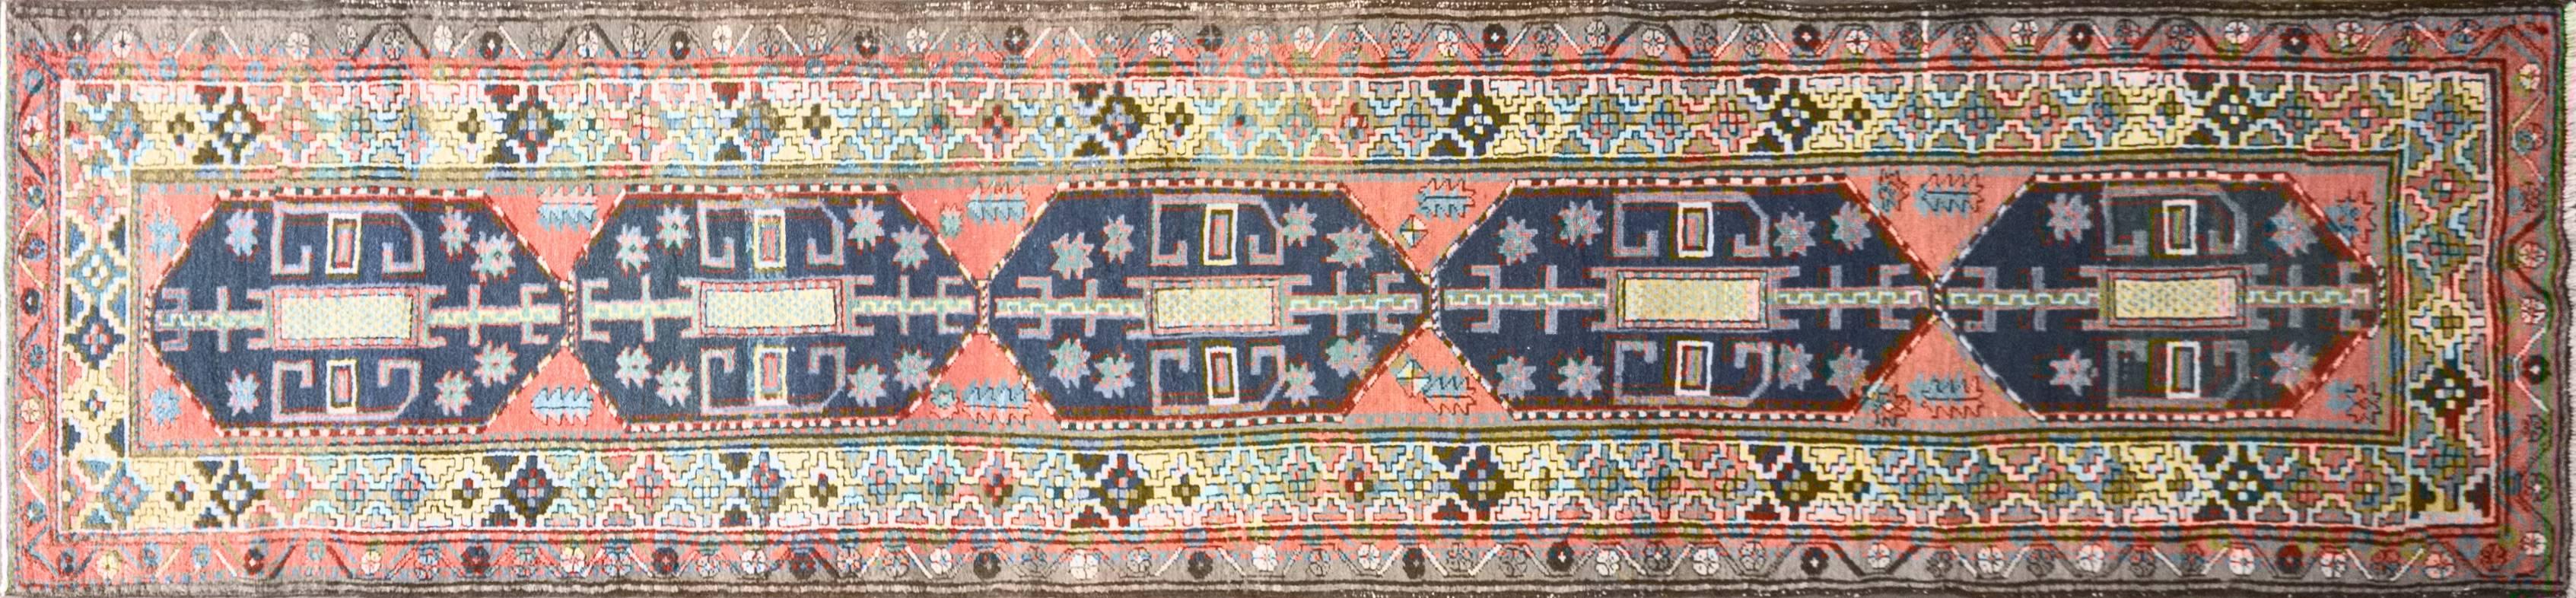 Spectacular: Amazing color combinations throughout the field and the border, striking design and fine weave. The Bakhtiari tribe, based in Chahar Mahaal and Bakhtiari, is well known for their rugs and weavings, 3' x 14'5